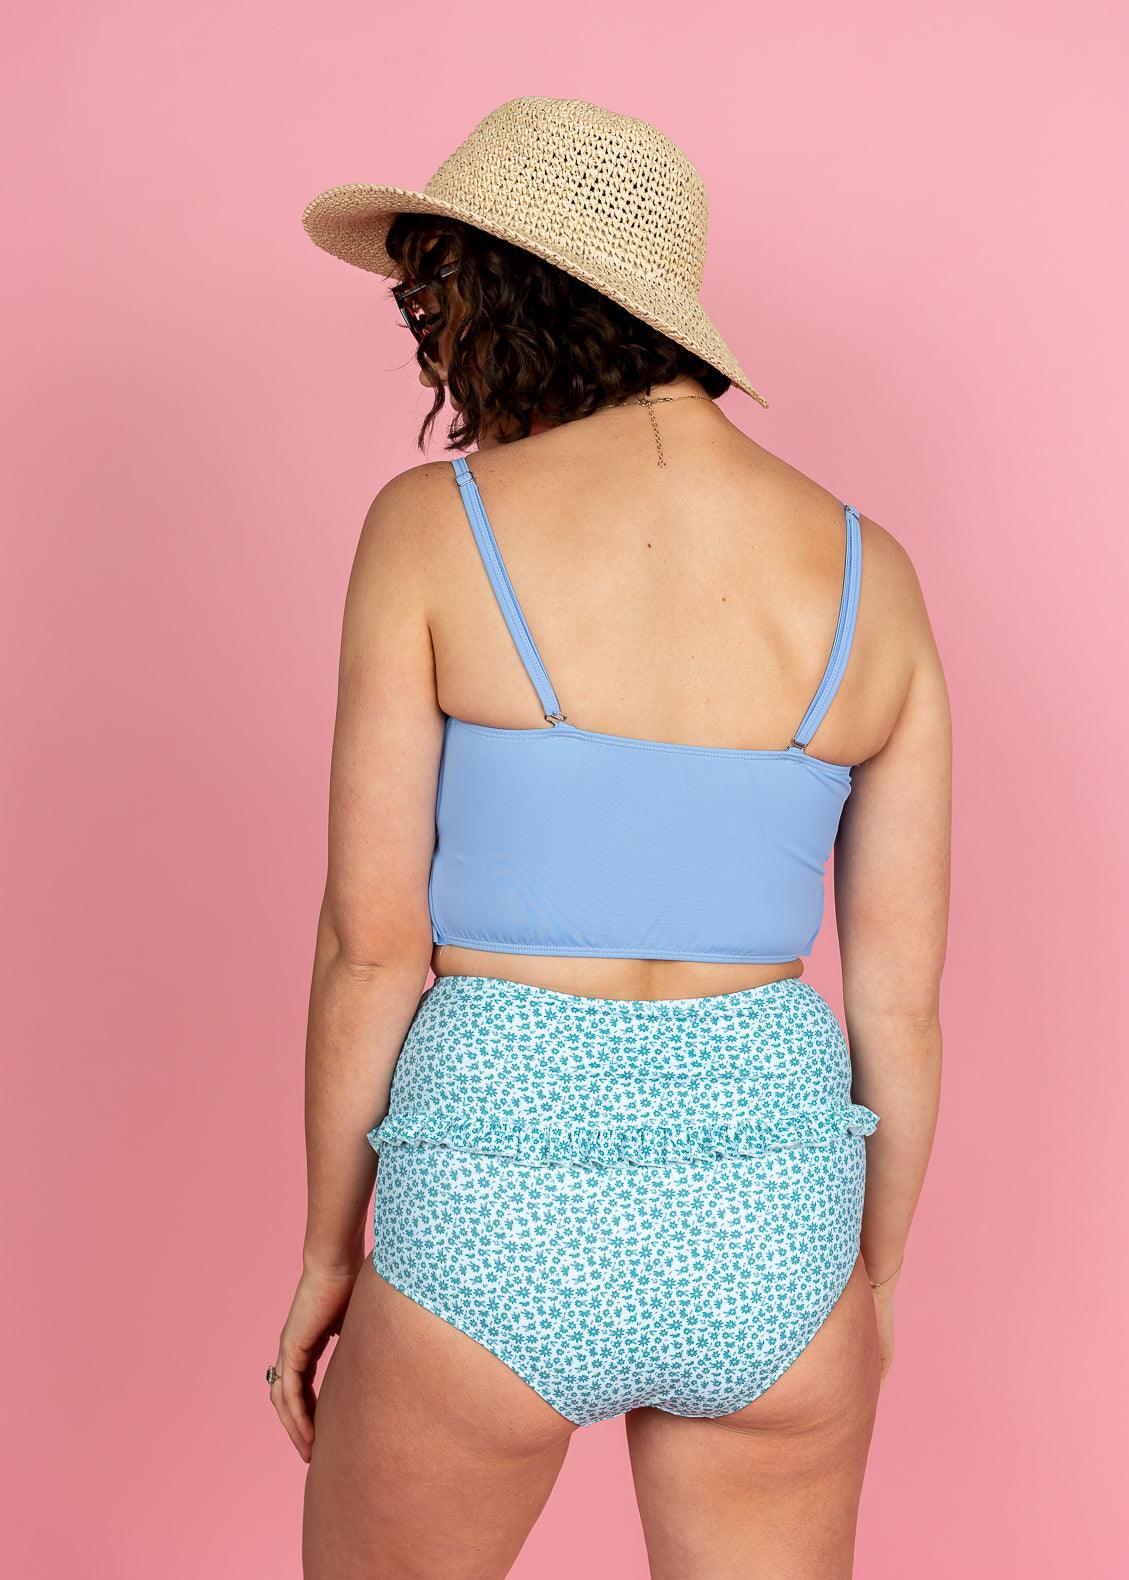 High-Waisted Swimsuit Bottom - Blue Ditsy Floral